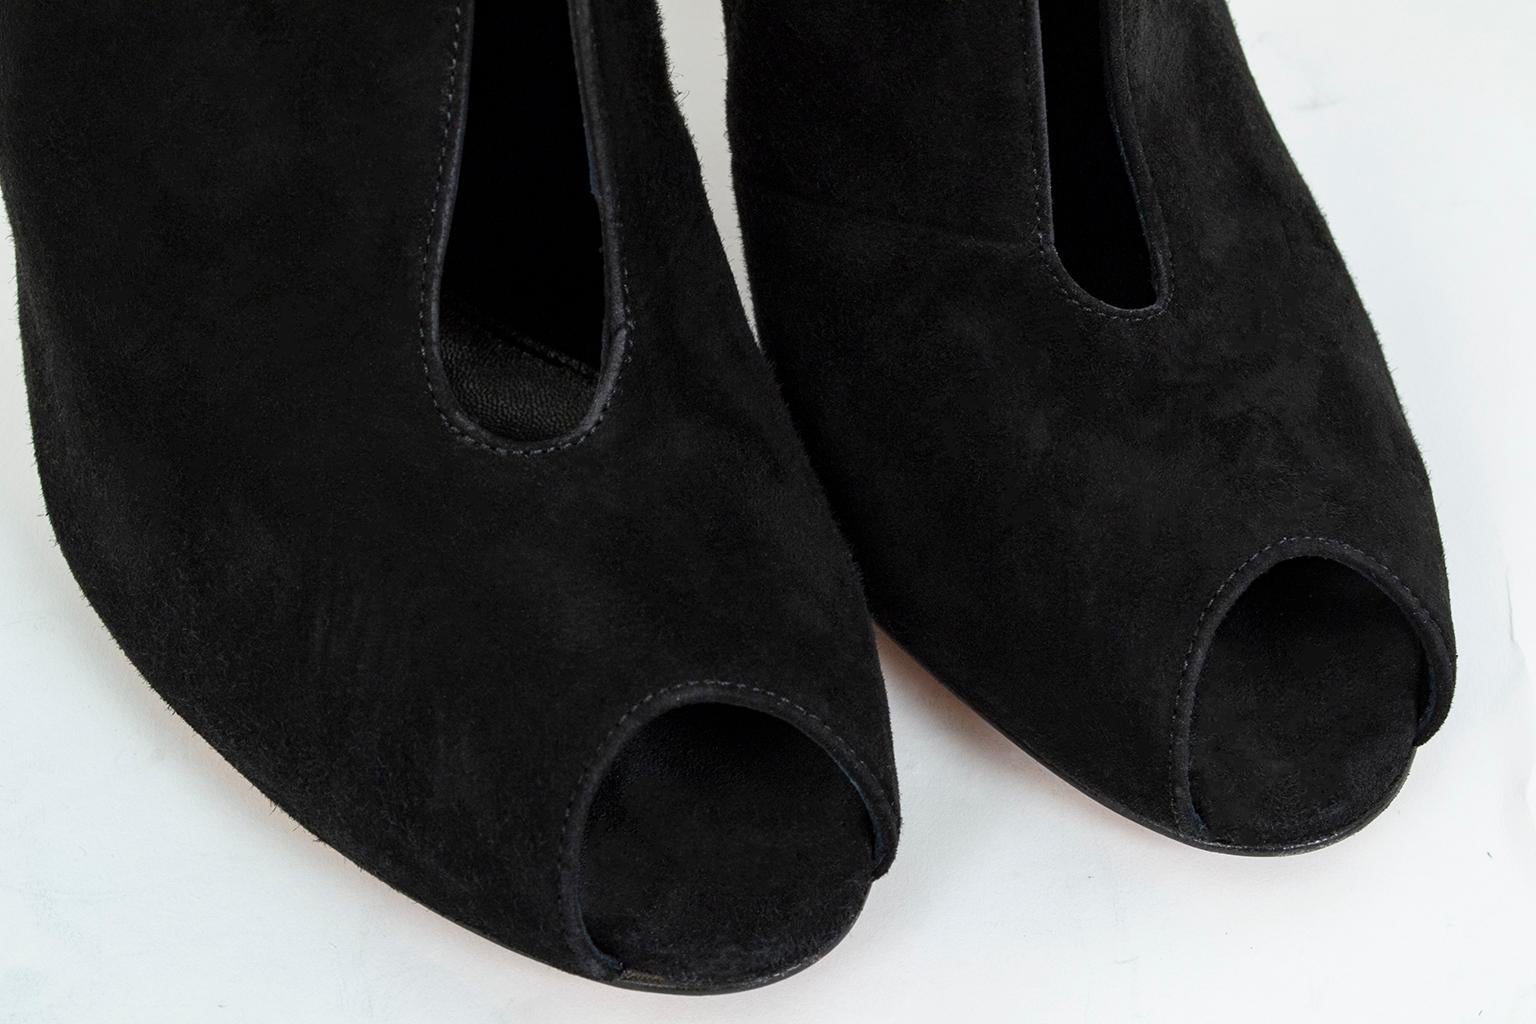 Gianvito Rossi Black Suede Collared Décolleté Peep Toe Bootie – It 39, 2012 For Sale 1